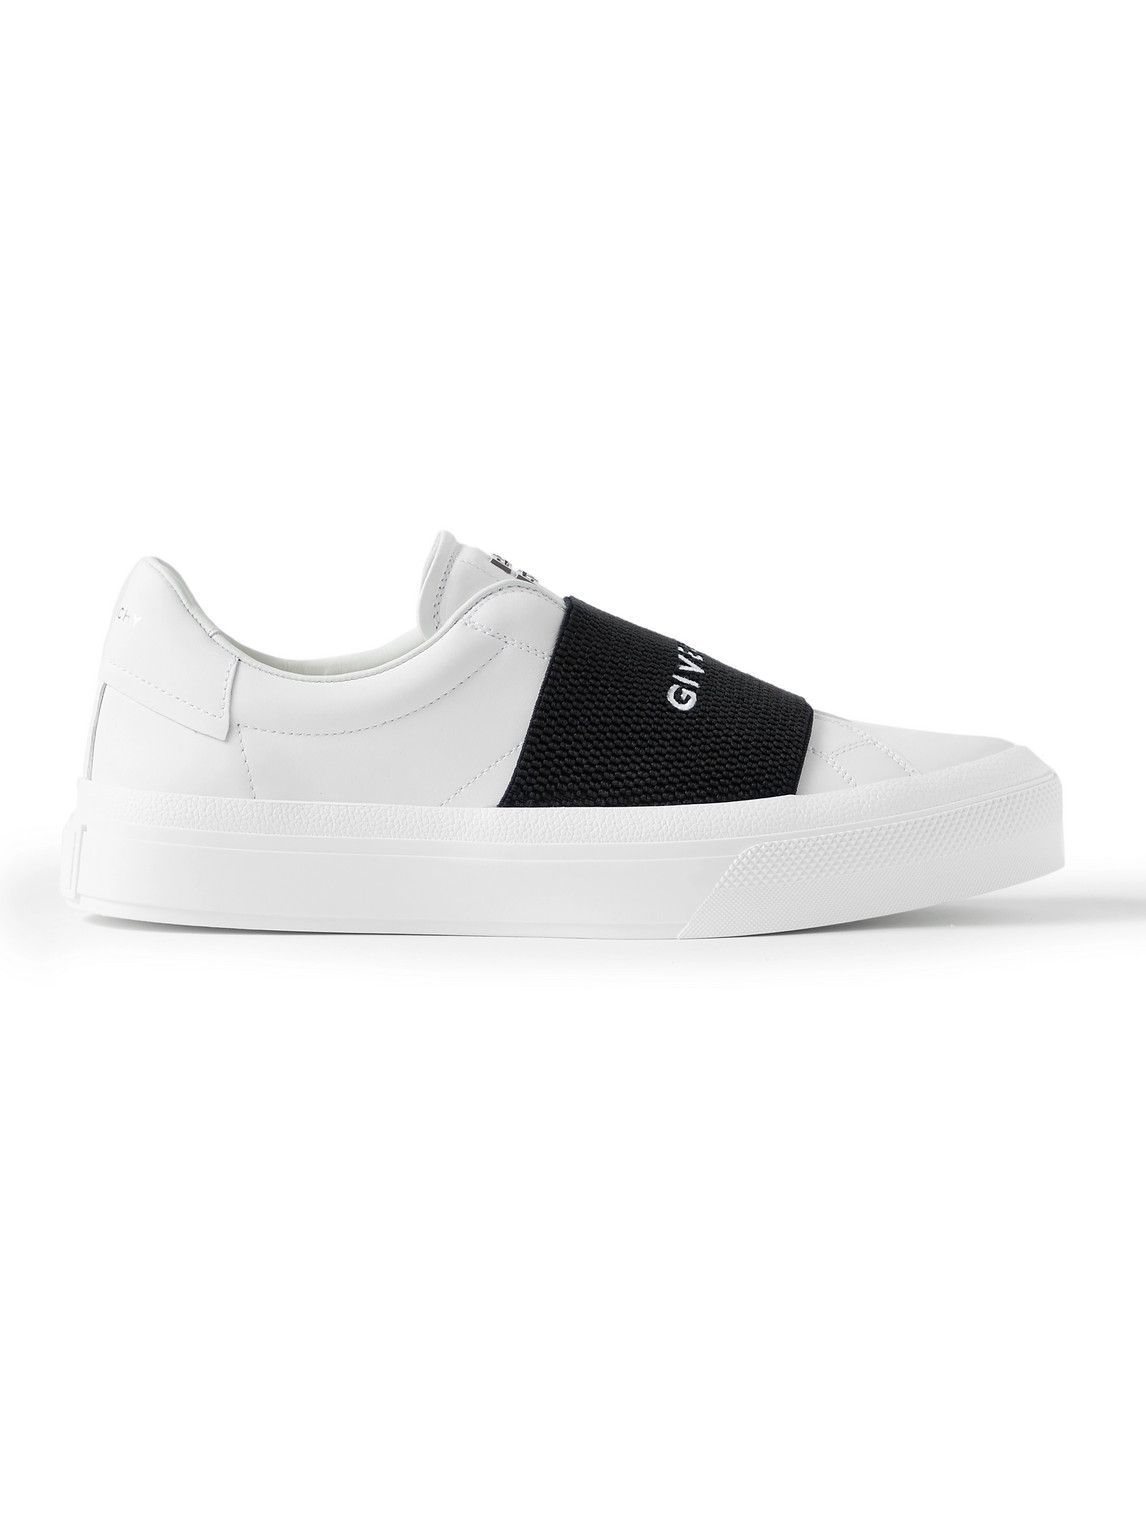 Givenchy - City Sport Slip-On Leather Sneakers - White Givenchy